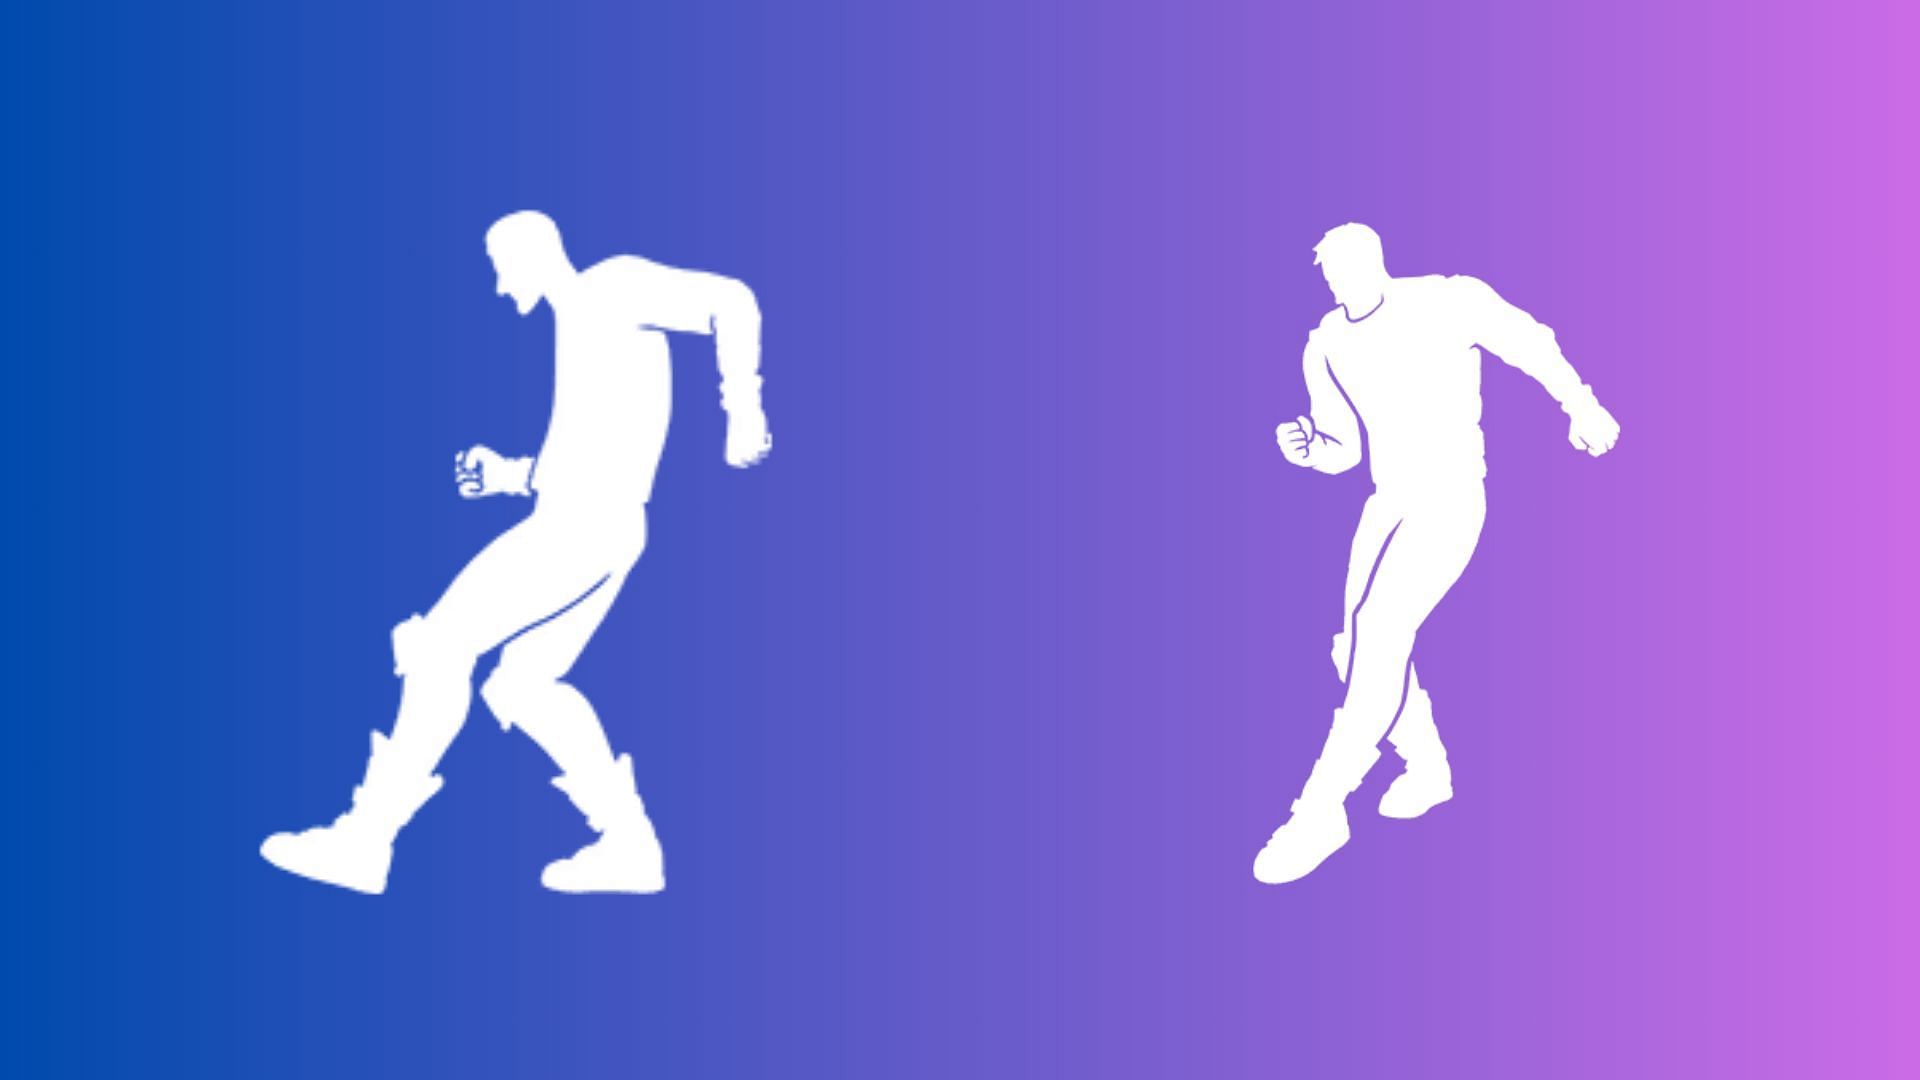 &quot;Jubi Slide Emote is literally a scam&quot;: Fortnite community upset that new Emote is same as Side Shuffle